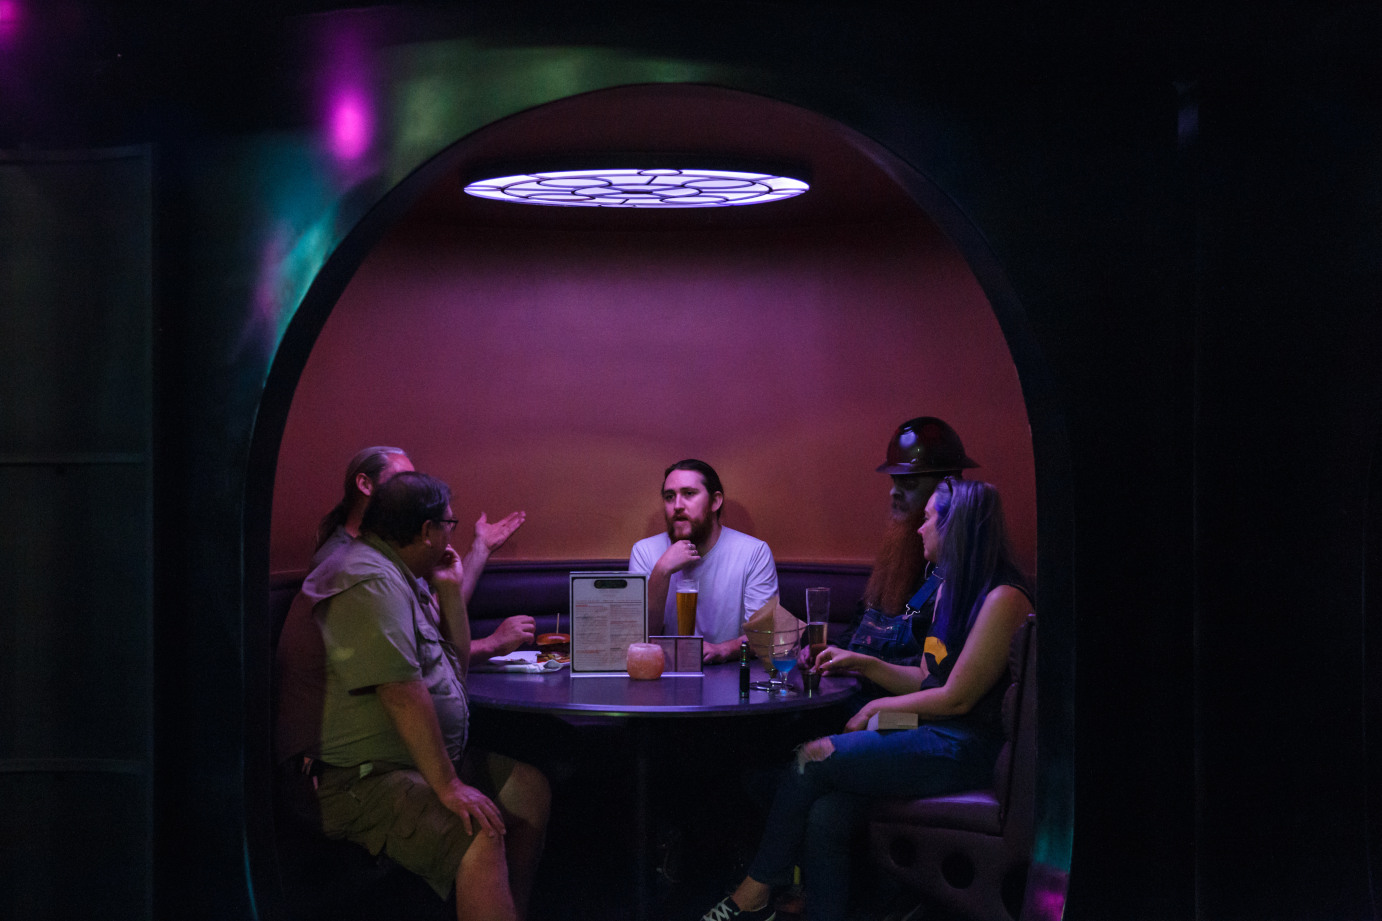 Interior, bar area, guests chatting and enjoying drinks in a private booth